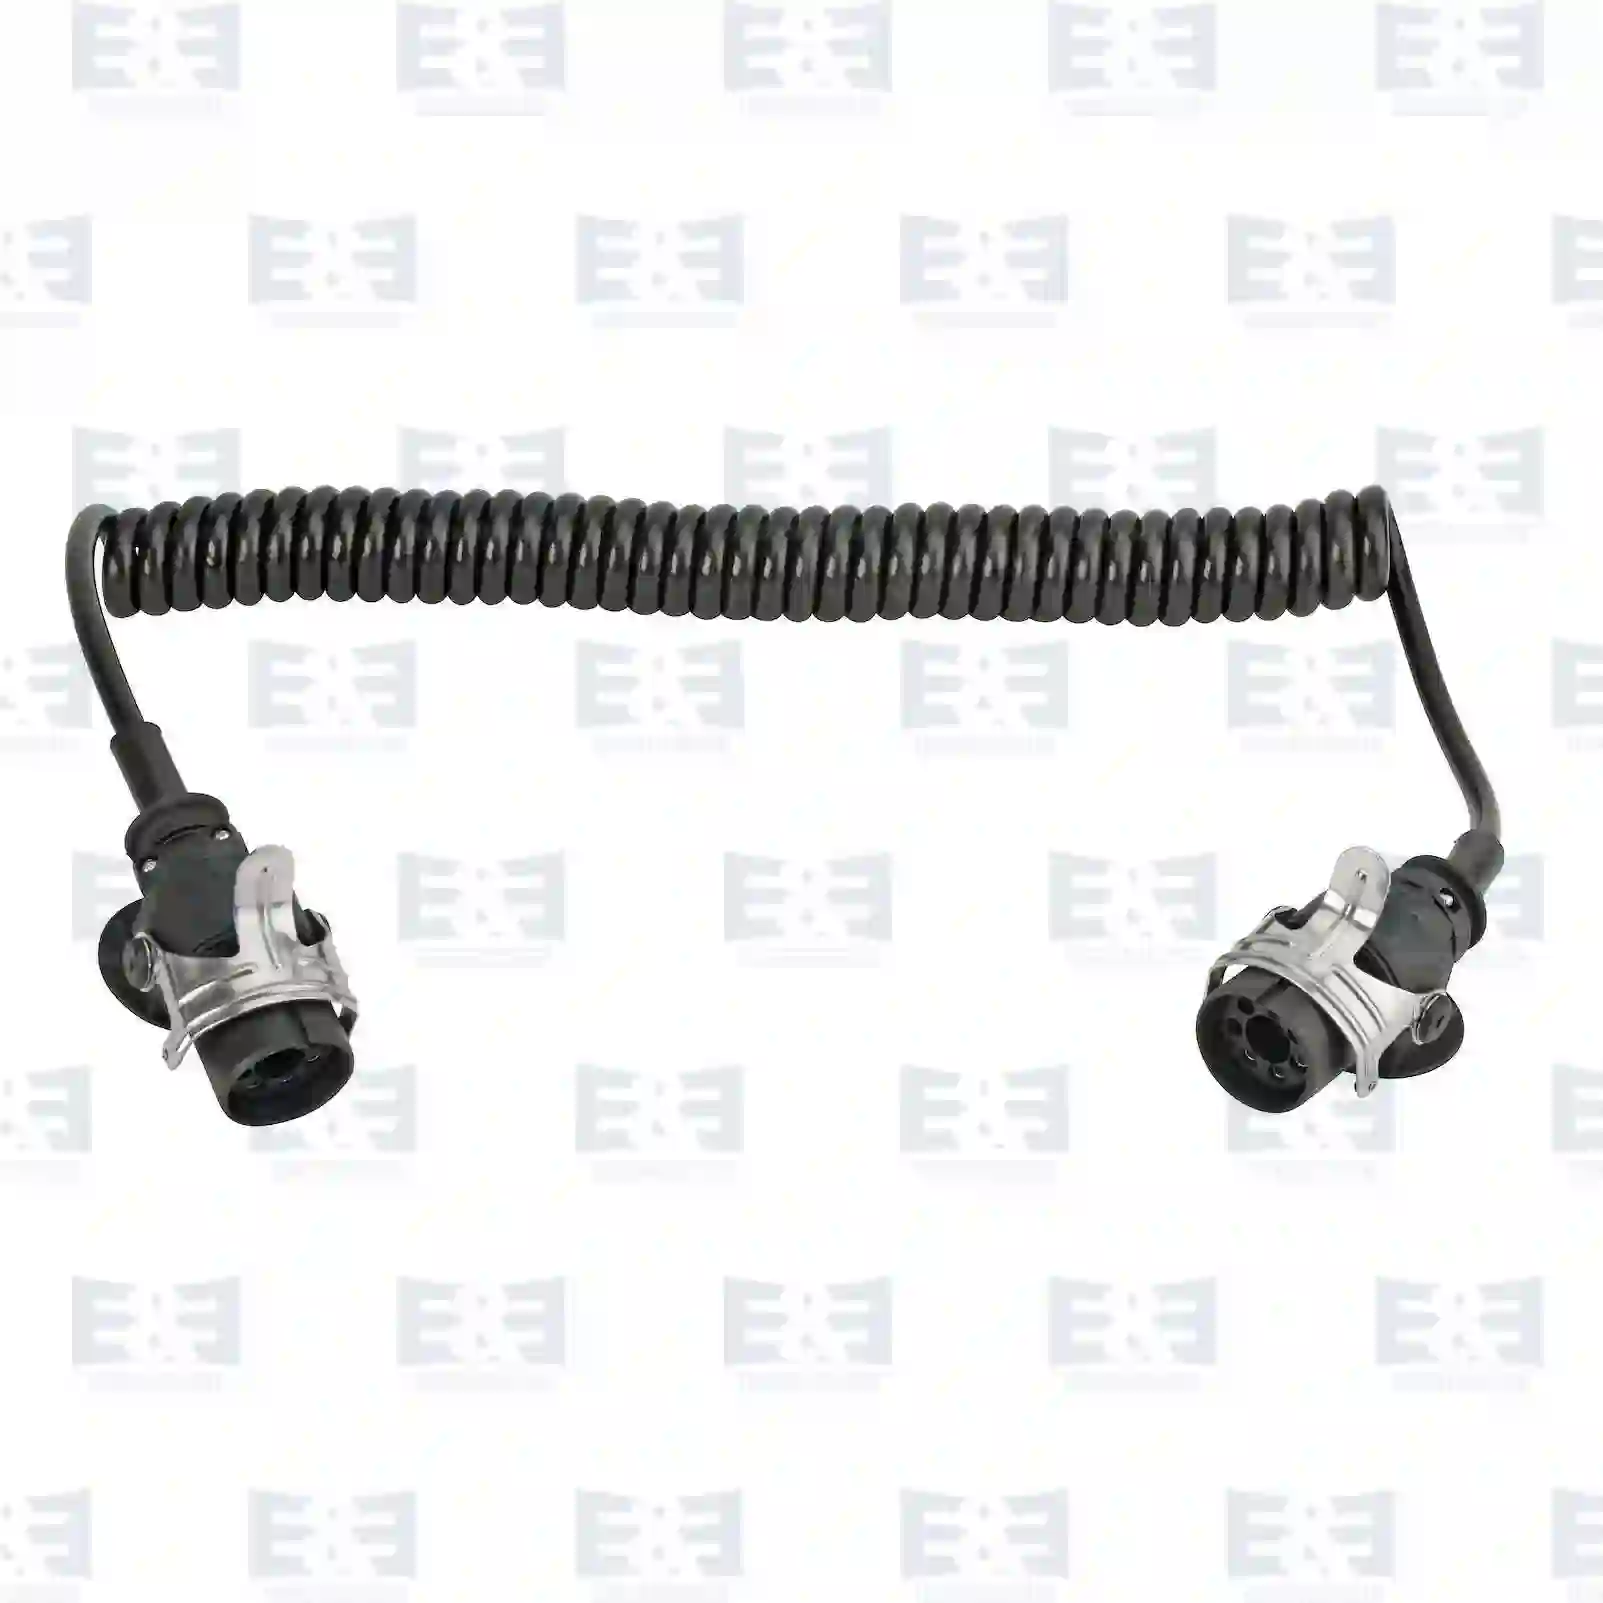 Electrical Equipment Electrical coil, EE No 2E2286428 ,  oem no:1286274, 1304135, 1384319, 1645464, 1383749, 1399747, 1431678, 1904330, 1947584, 1077510 E&E Truck Spare Parts | Truck Spare Parts, Auotomotive Spare Parts